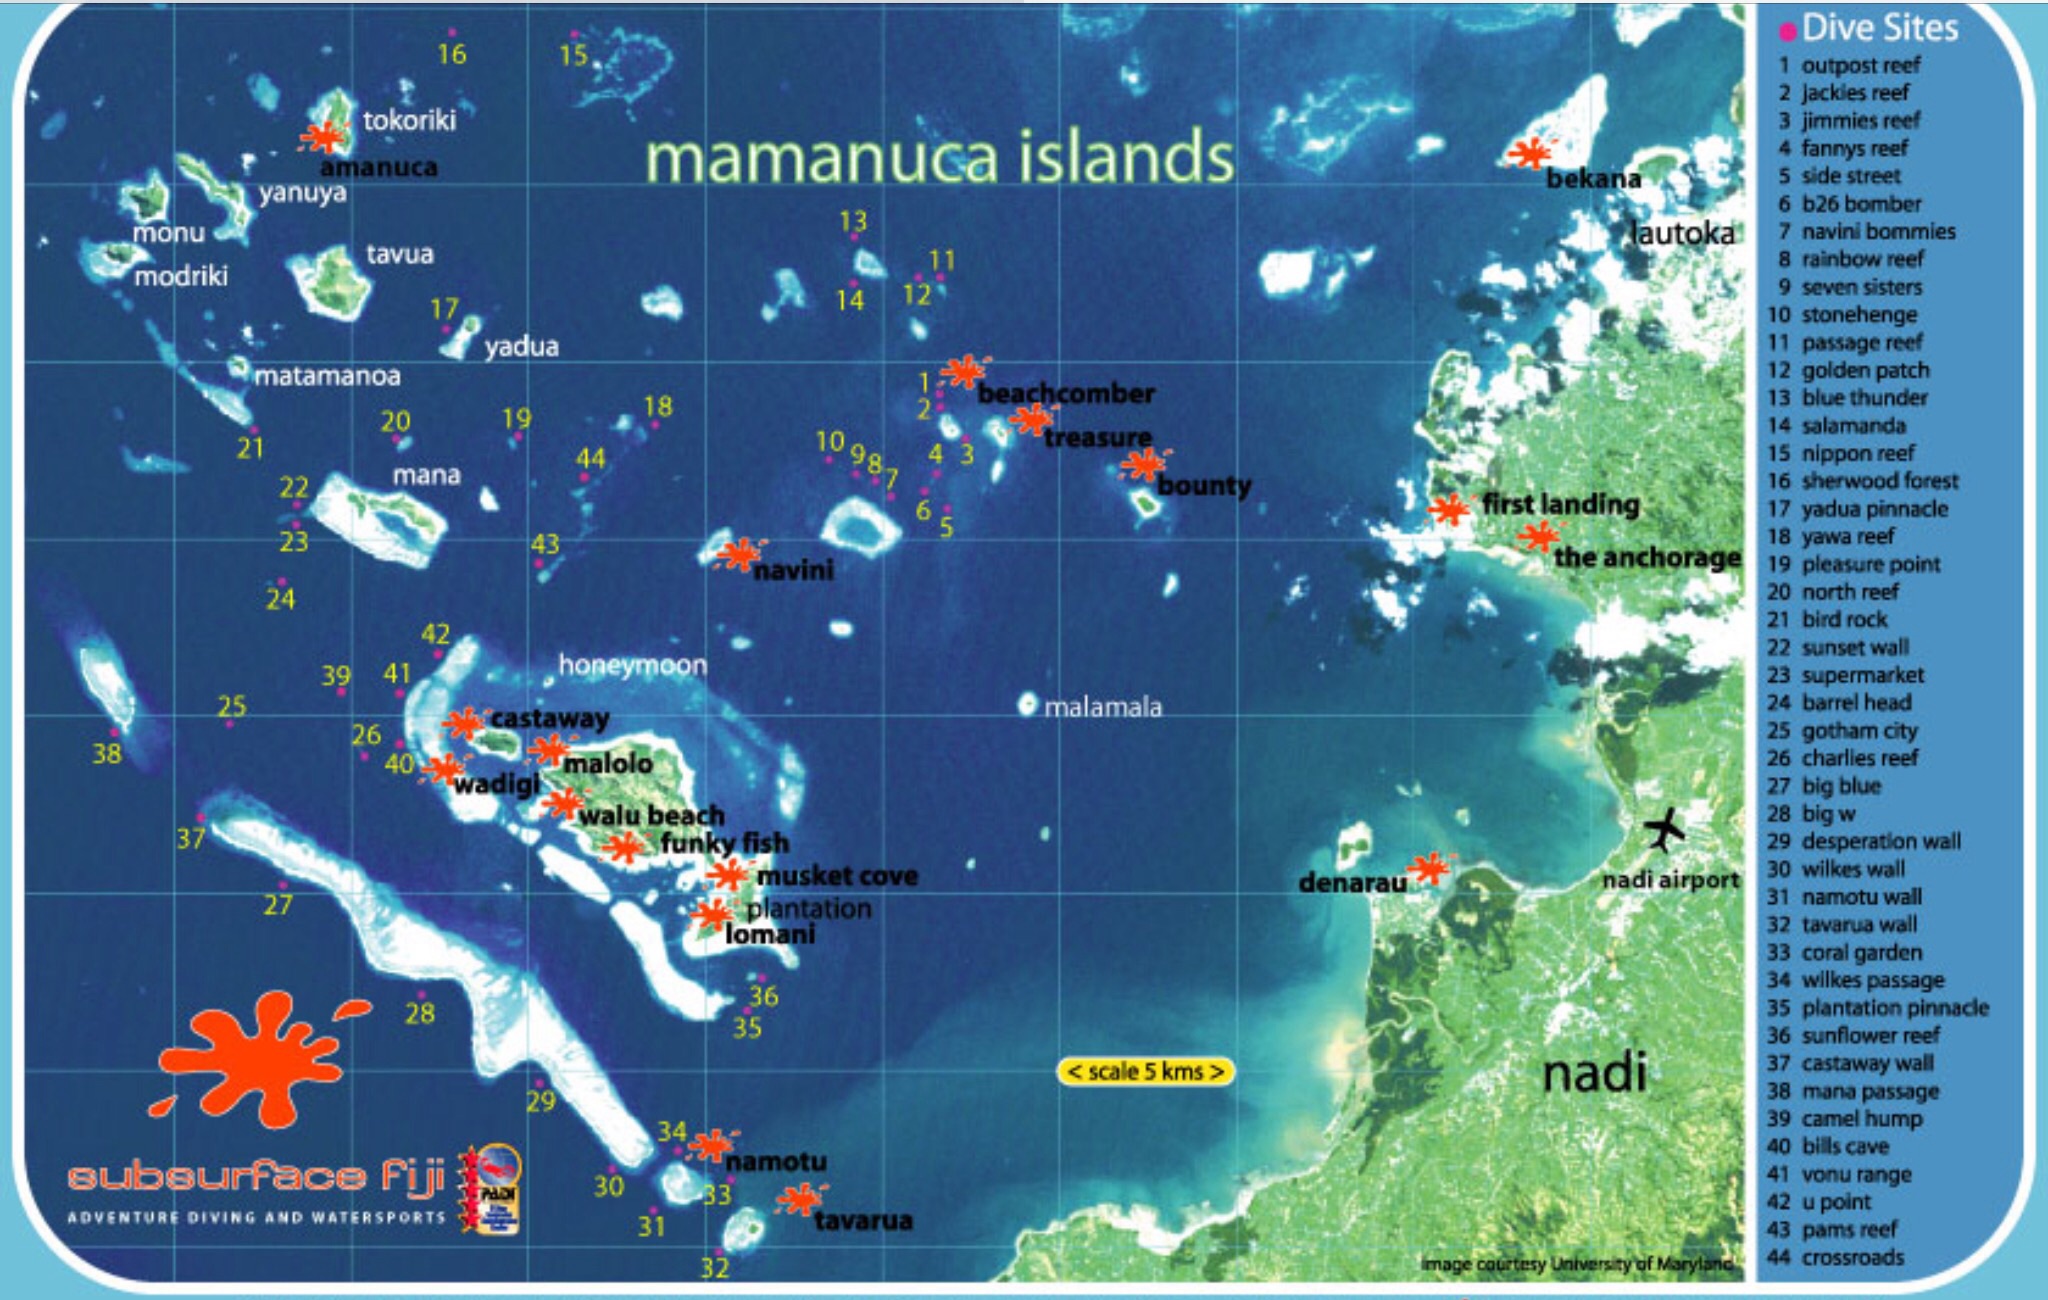 This map shows the numerous dive sites in the area. 